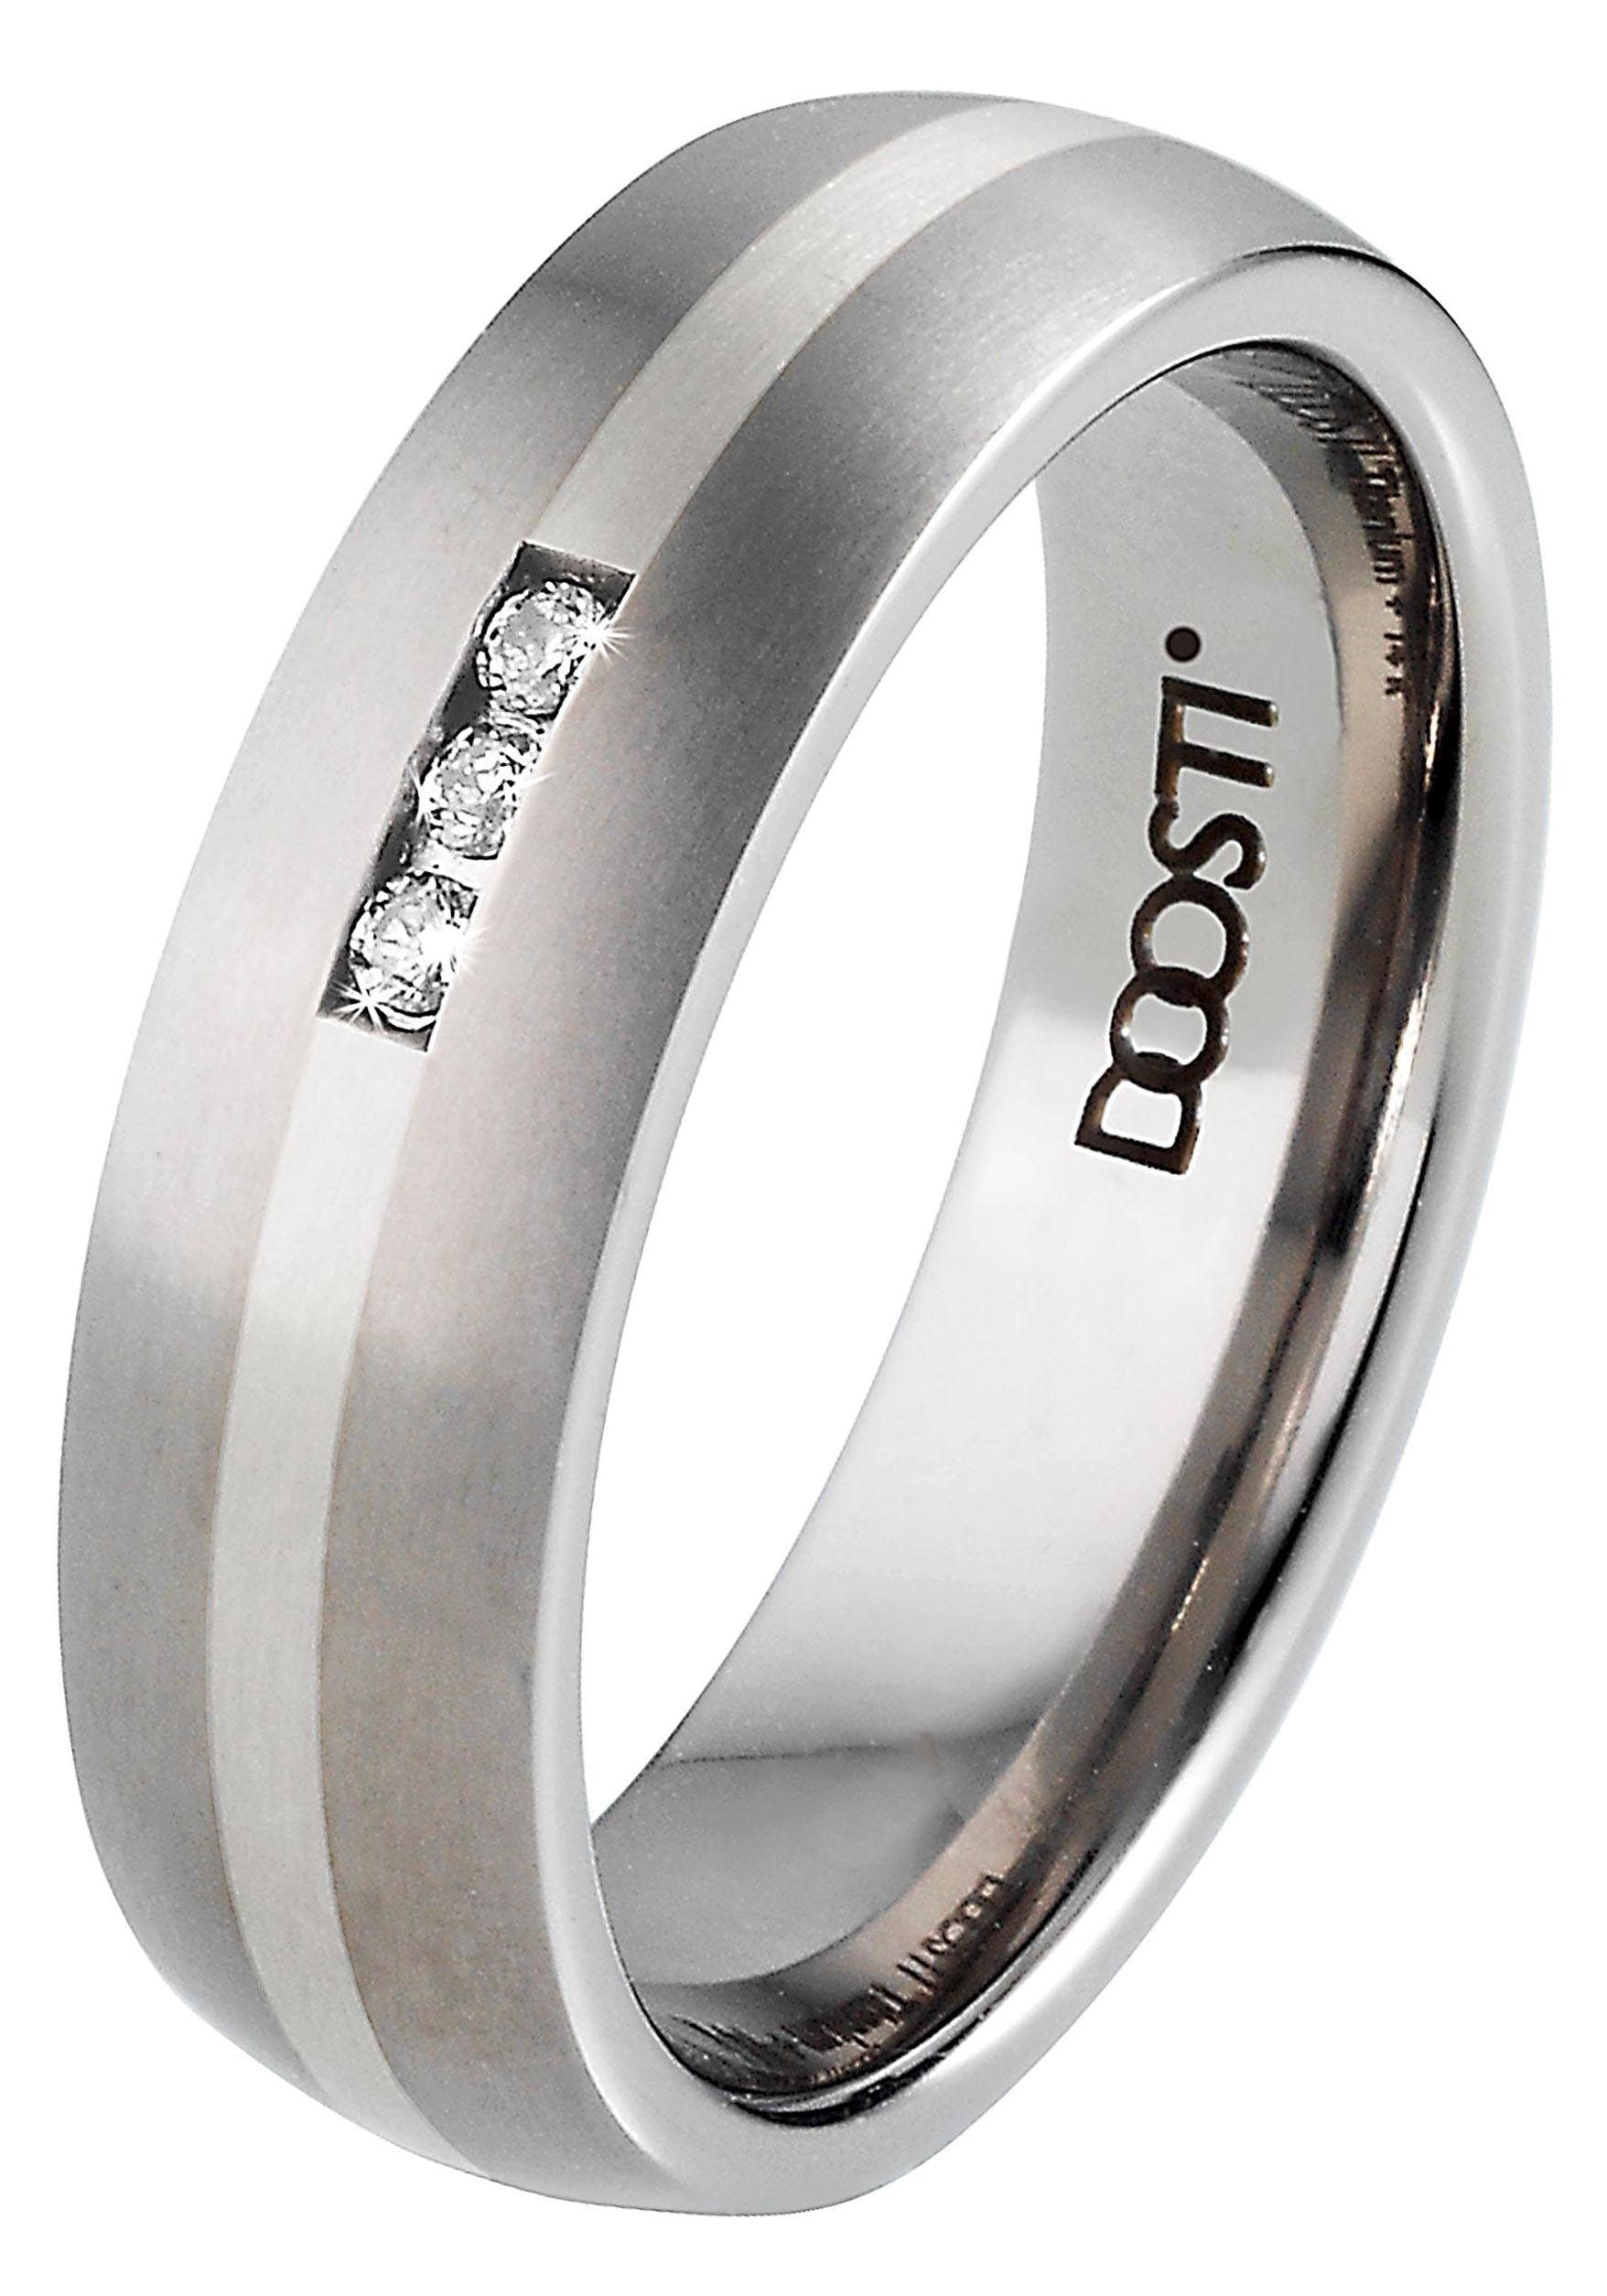 DOOSTI Trauring »TS-01-D, mit SILVER kaufen Made bequem Germany oder - Zirkonia wahlweise in ohne TS-01-H, LINE«